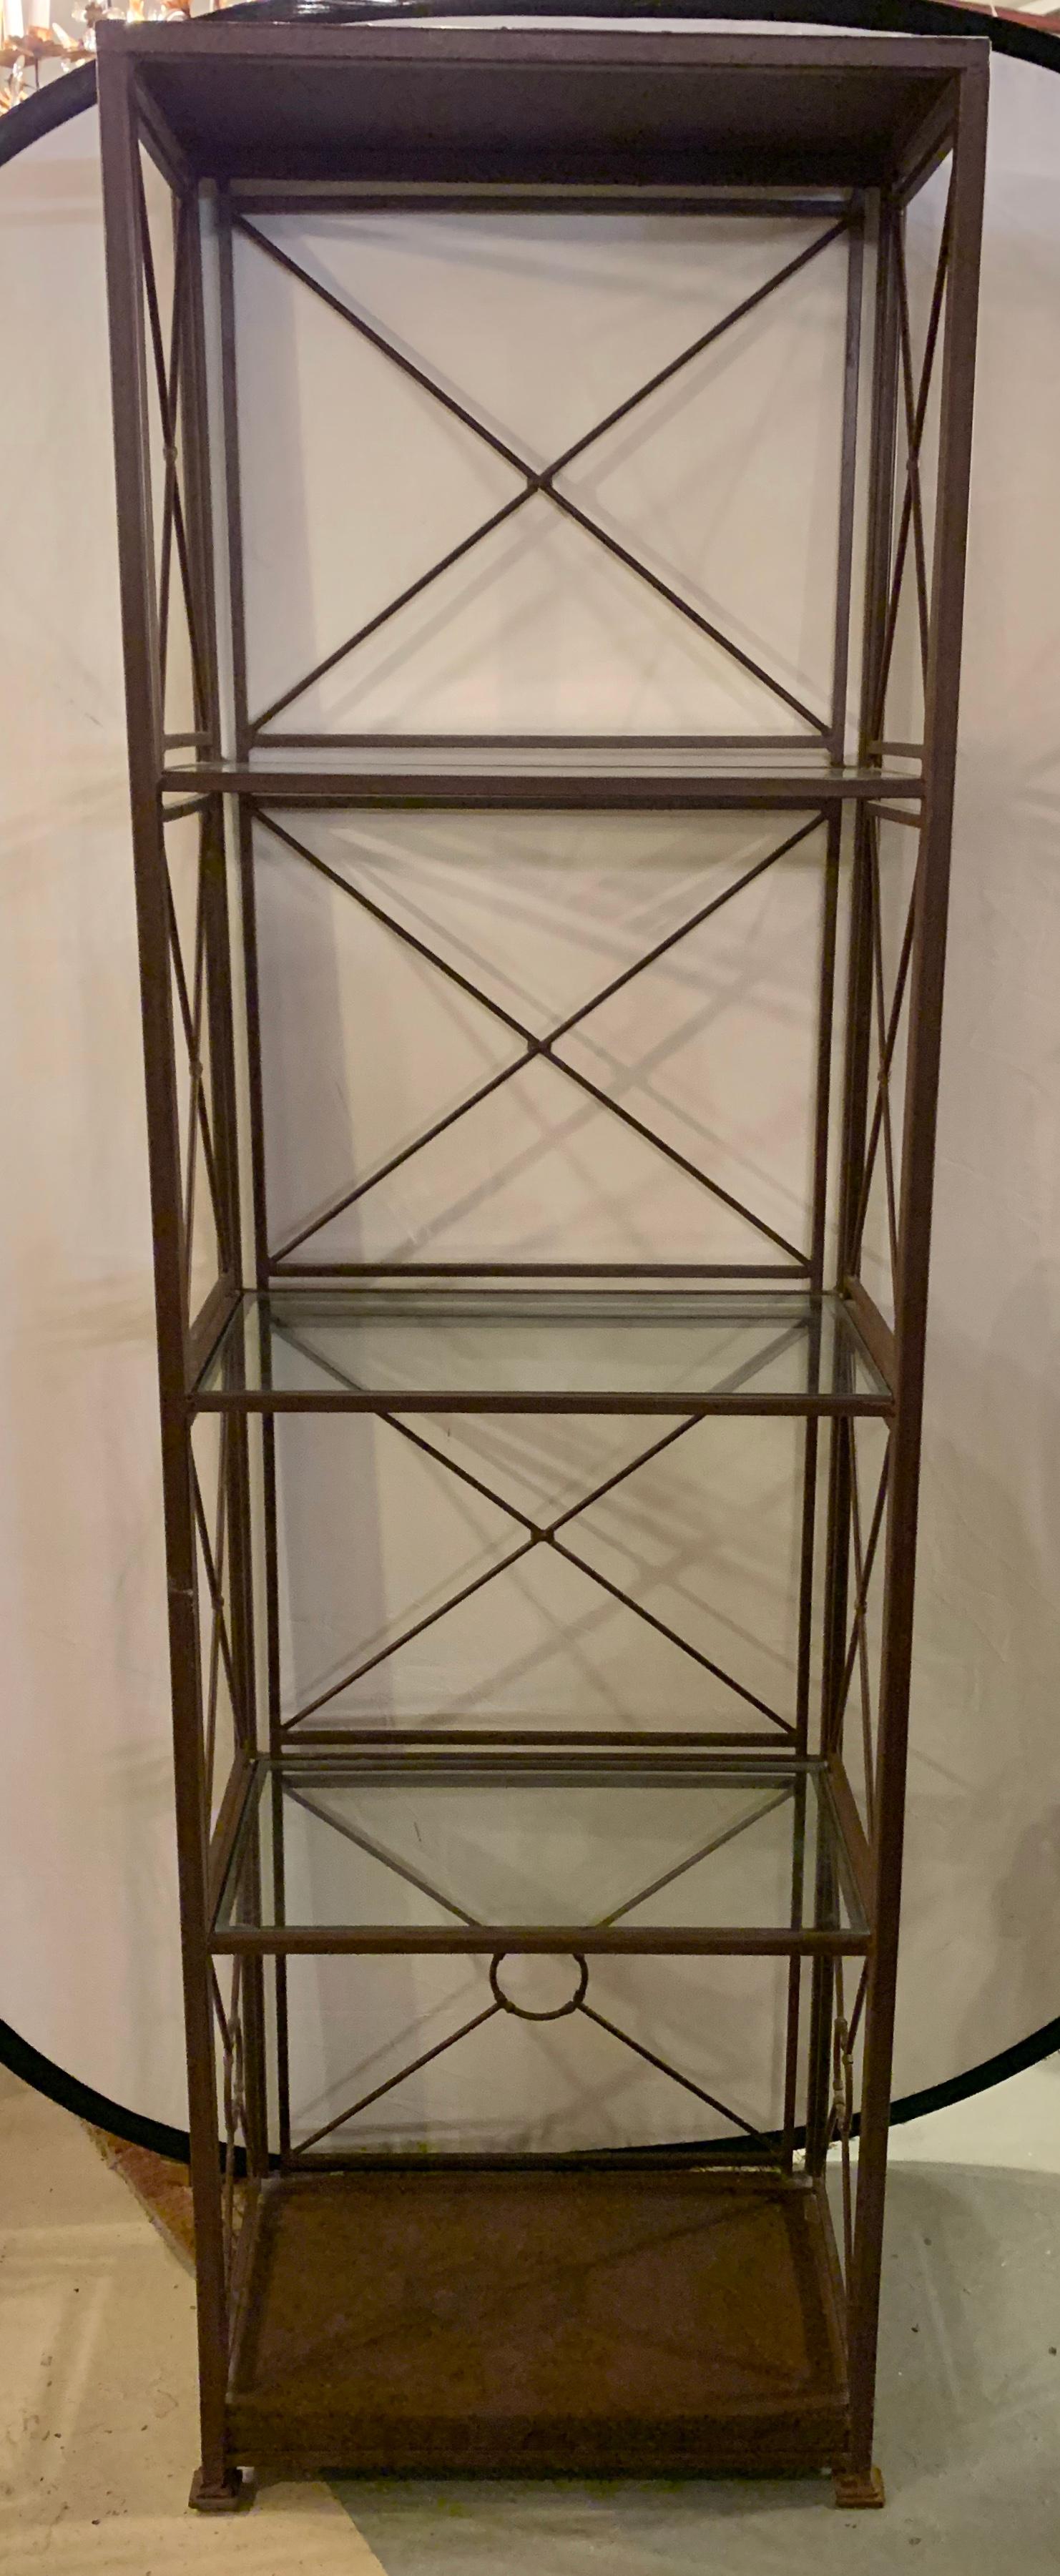 Industrial shelf Unit or Étagère. Tall and impressive having five shelve three of glass form with X decorated back and sides.